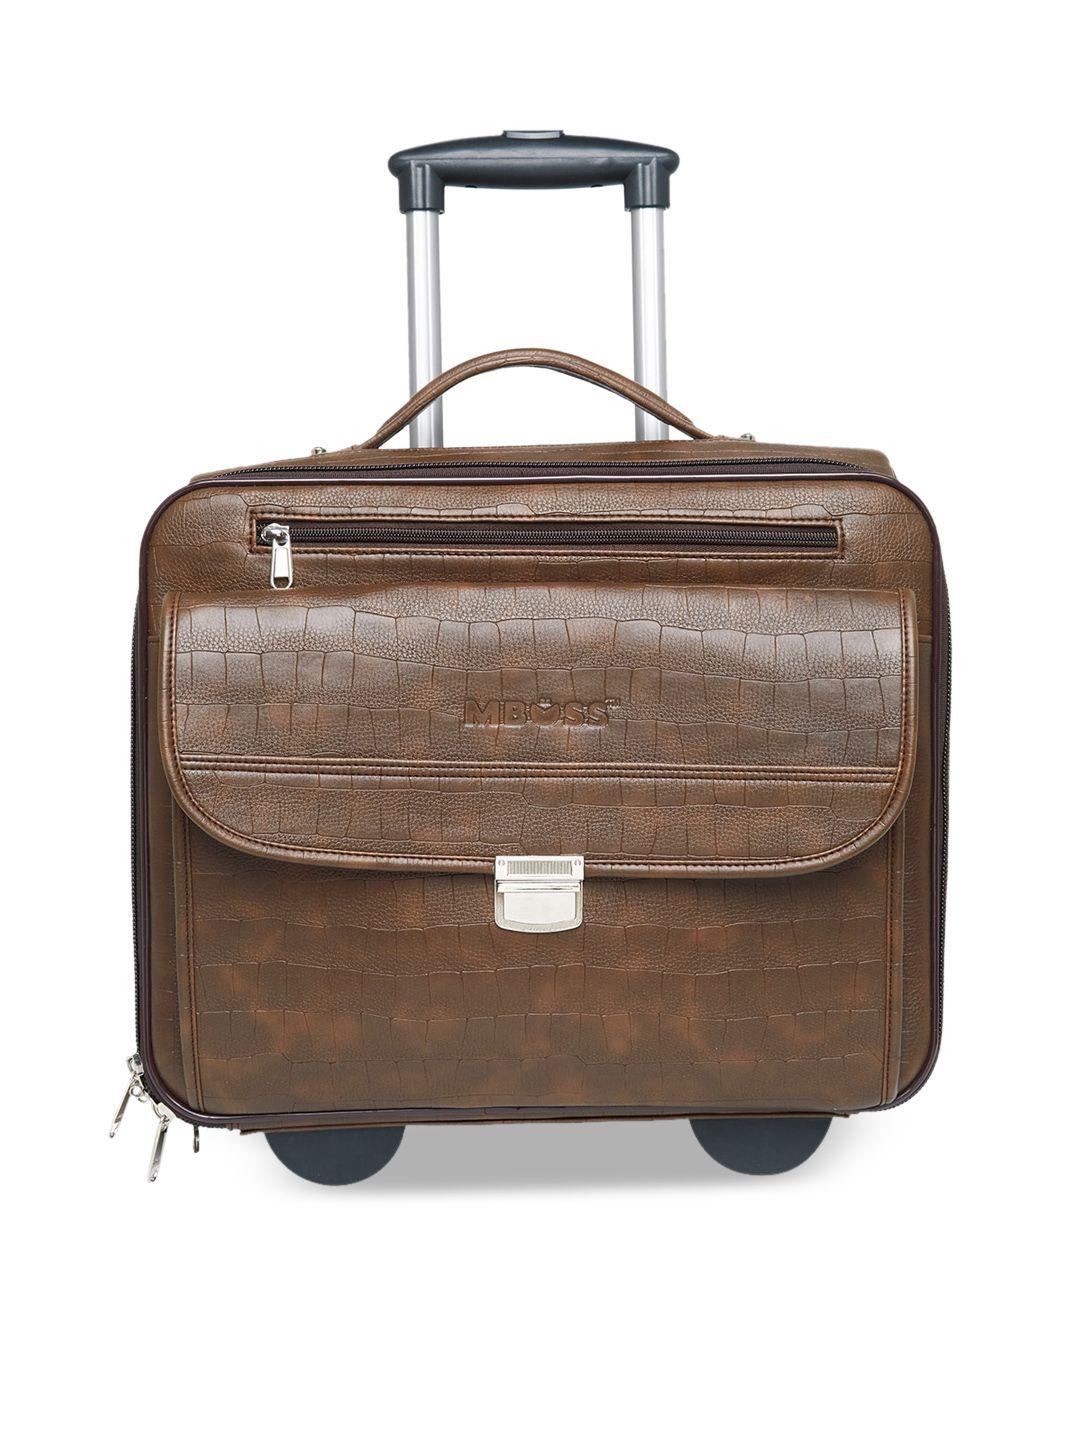 mboss brown cabin trolley bag with laptop compartment